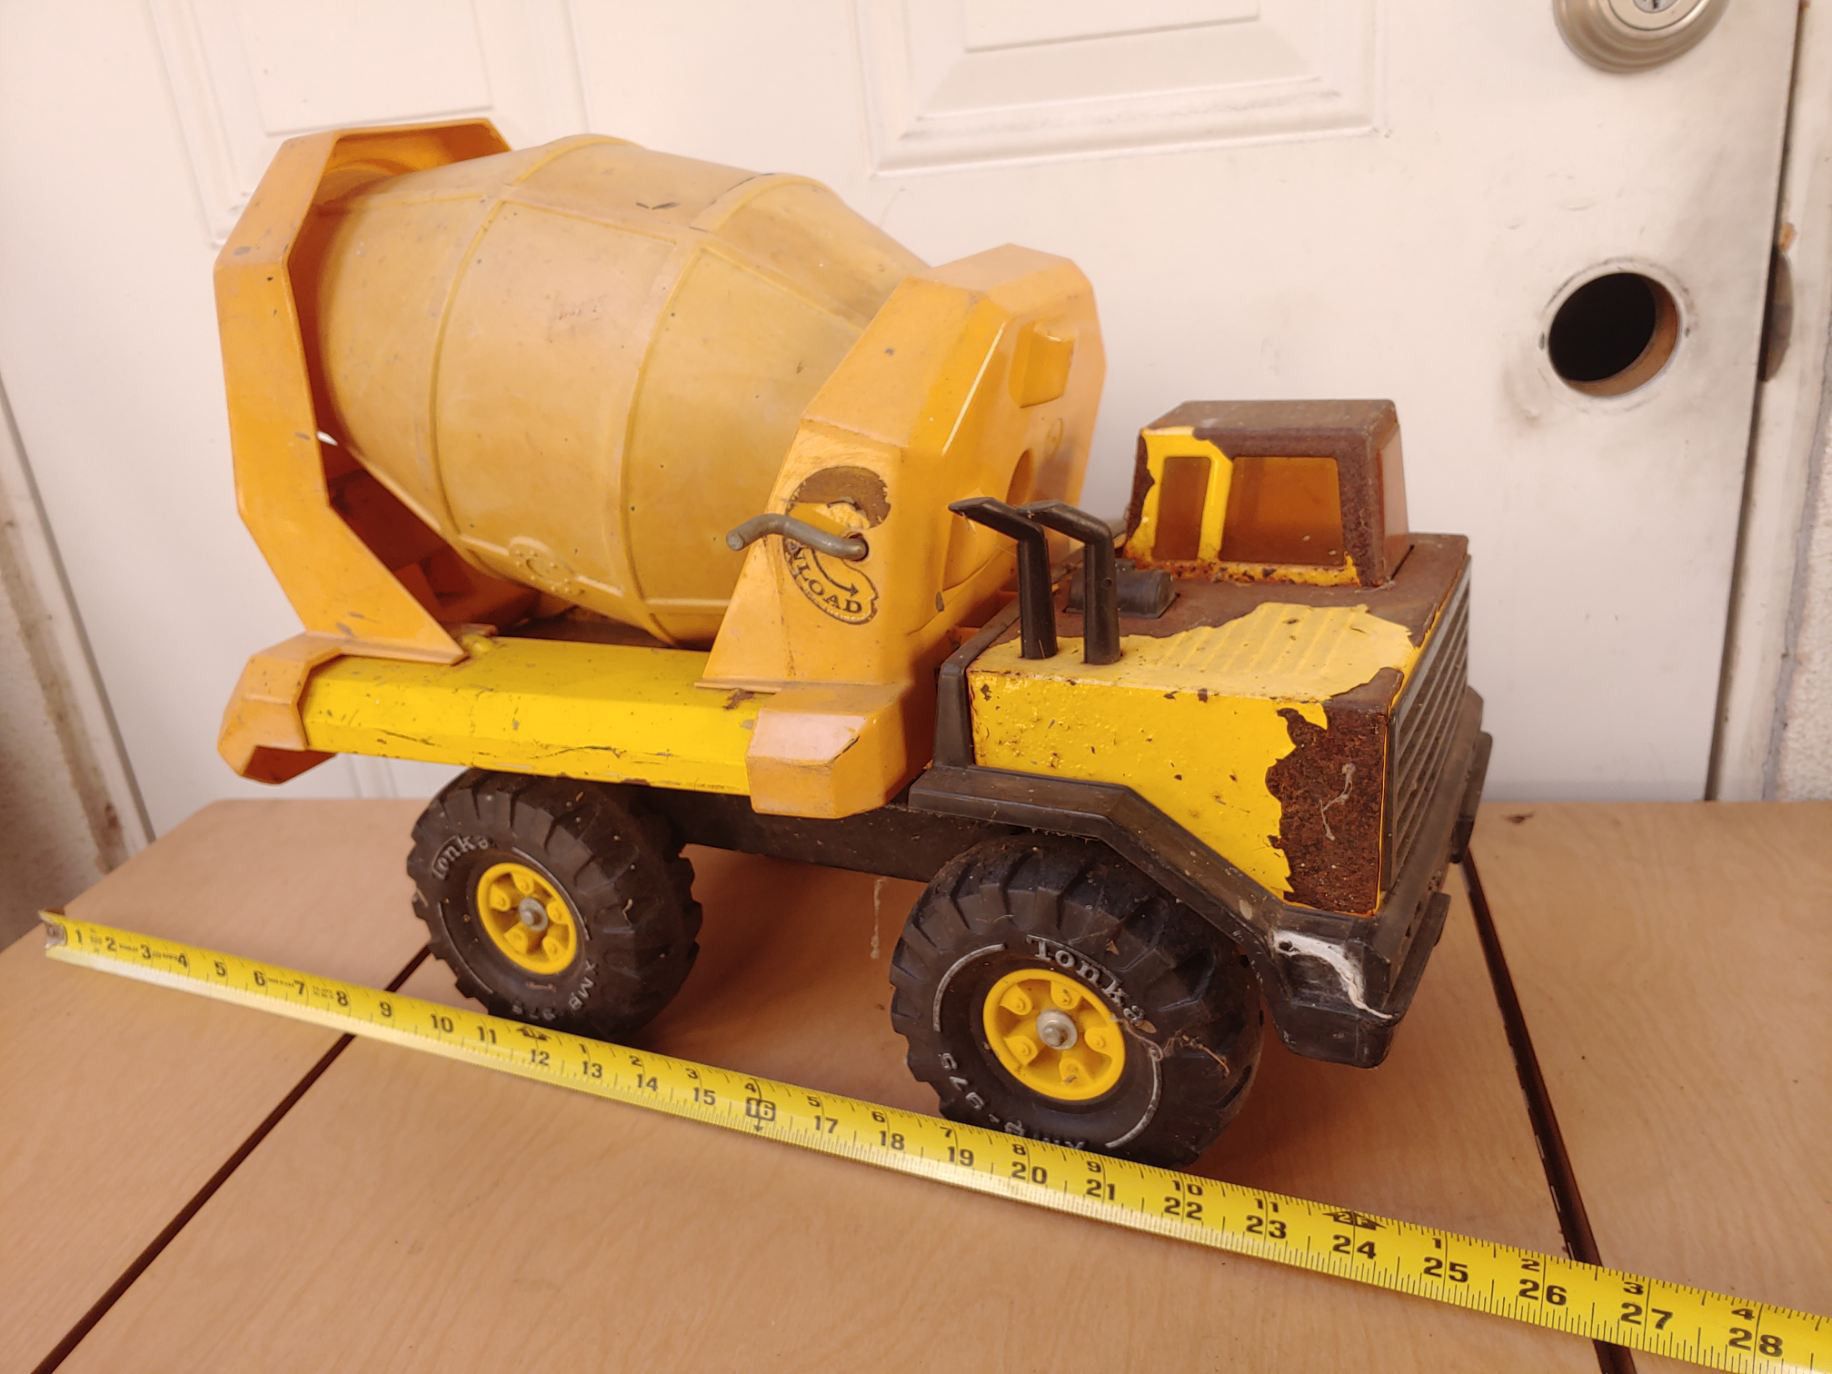 Vintage Tonka truck cement mixer 1980s 1970s era works great Rusty patina collectible man cave garage toy